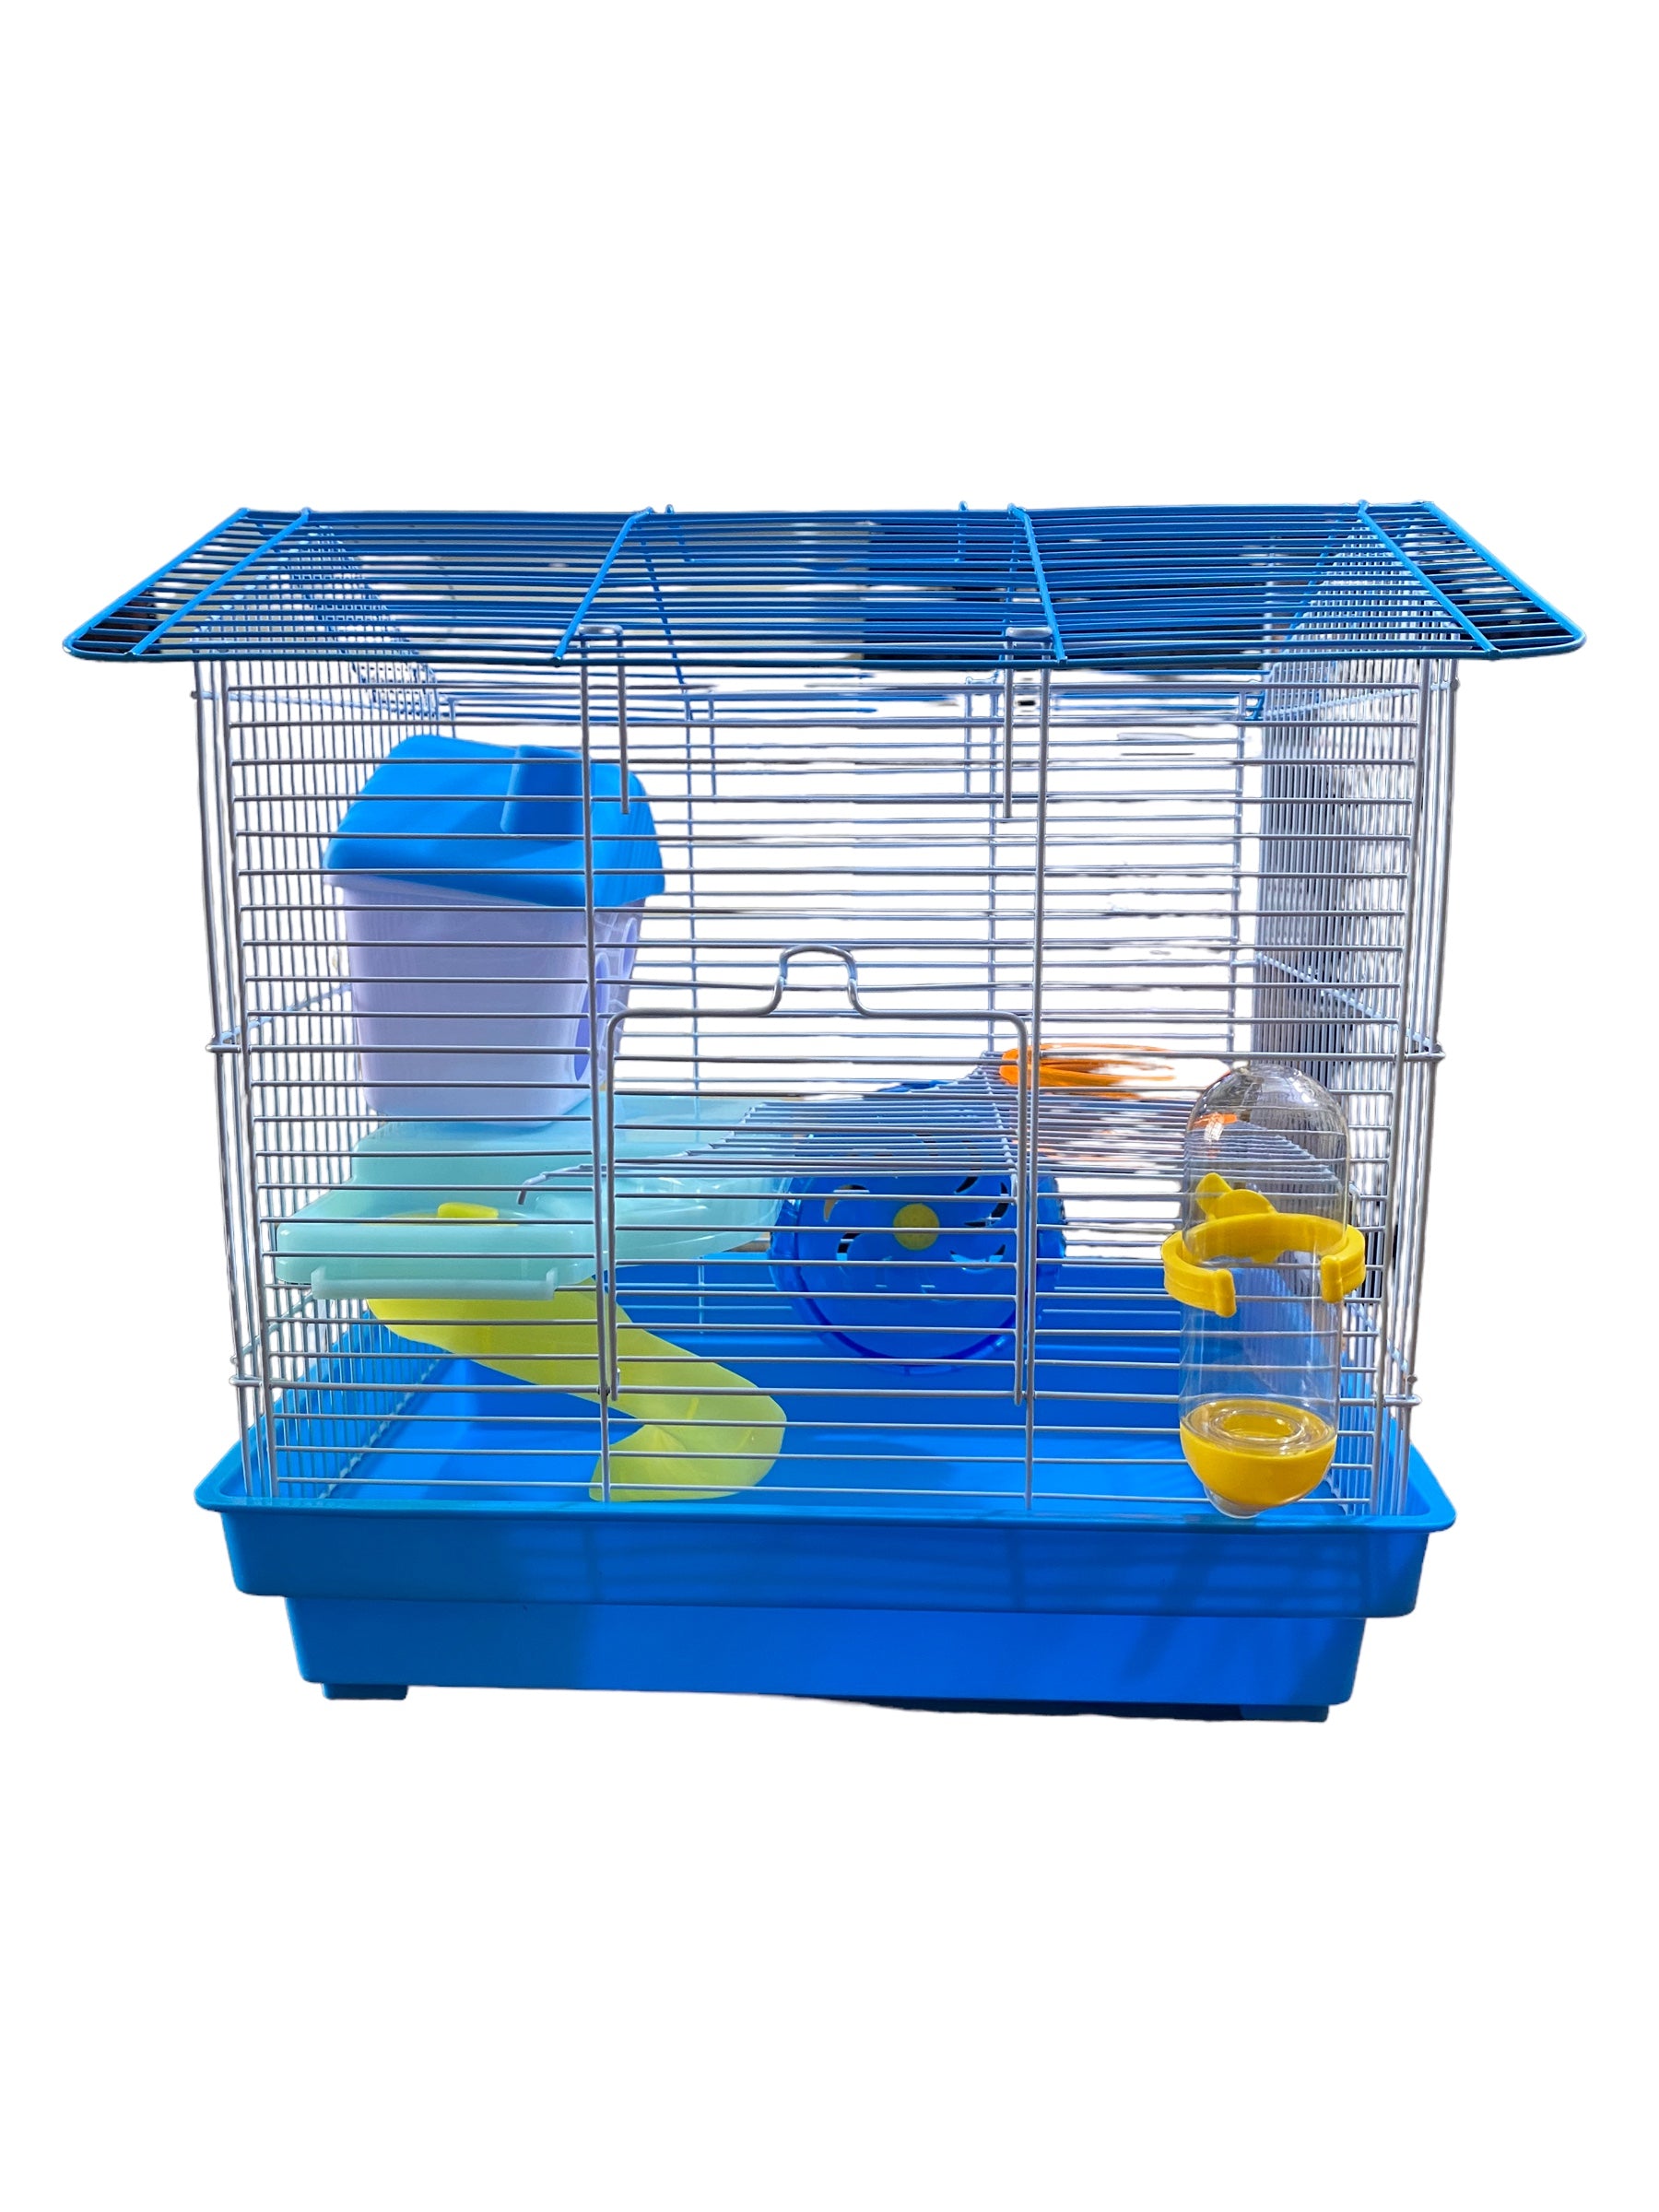 Gorilla pets Hamster Cage/Playhouse for Dwarf Hamster/Gerbil/Mice with a Food Cup, Water Bottle and Exercise Wheel with Spacious Two ladders cage (Color May Vary)